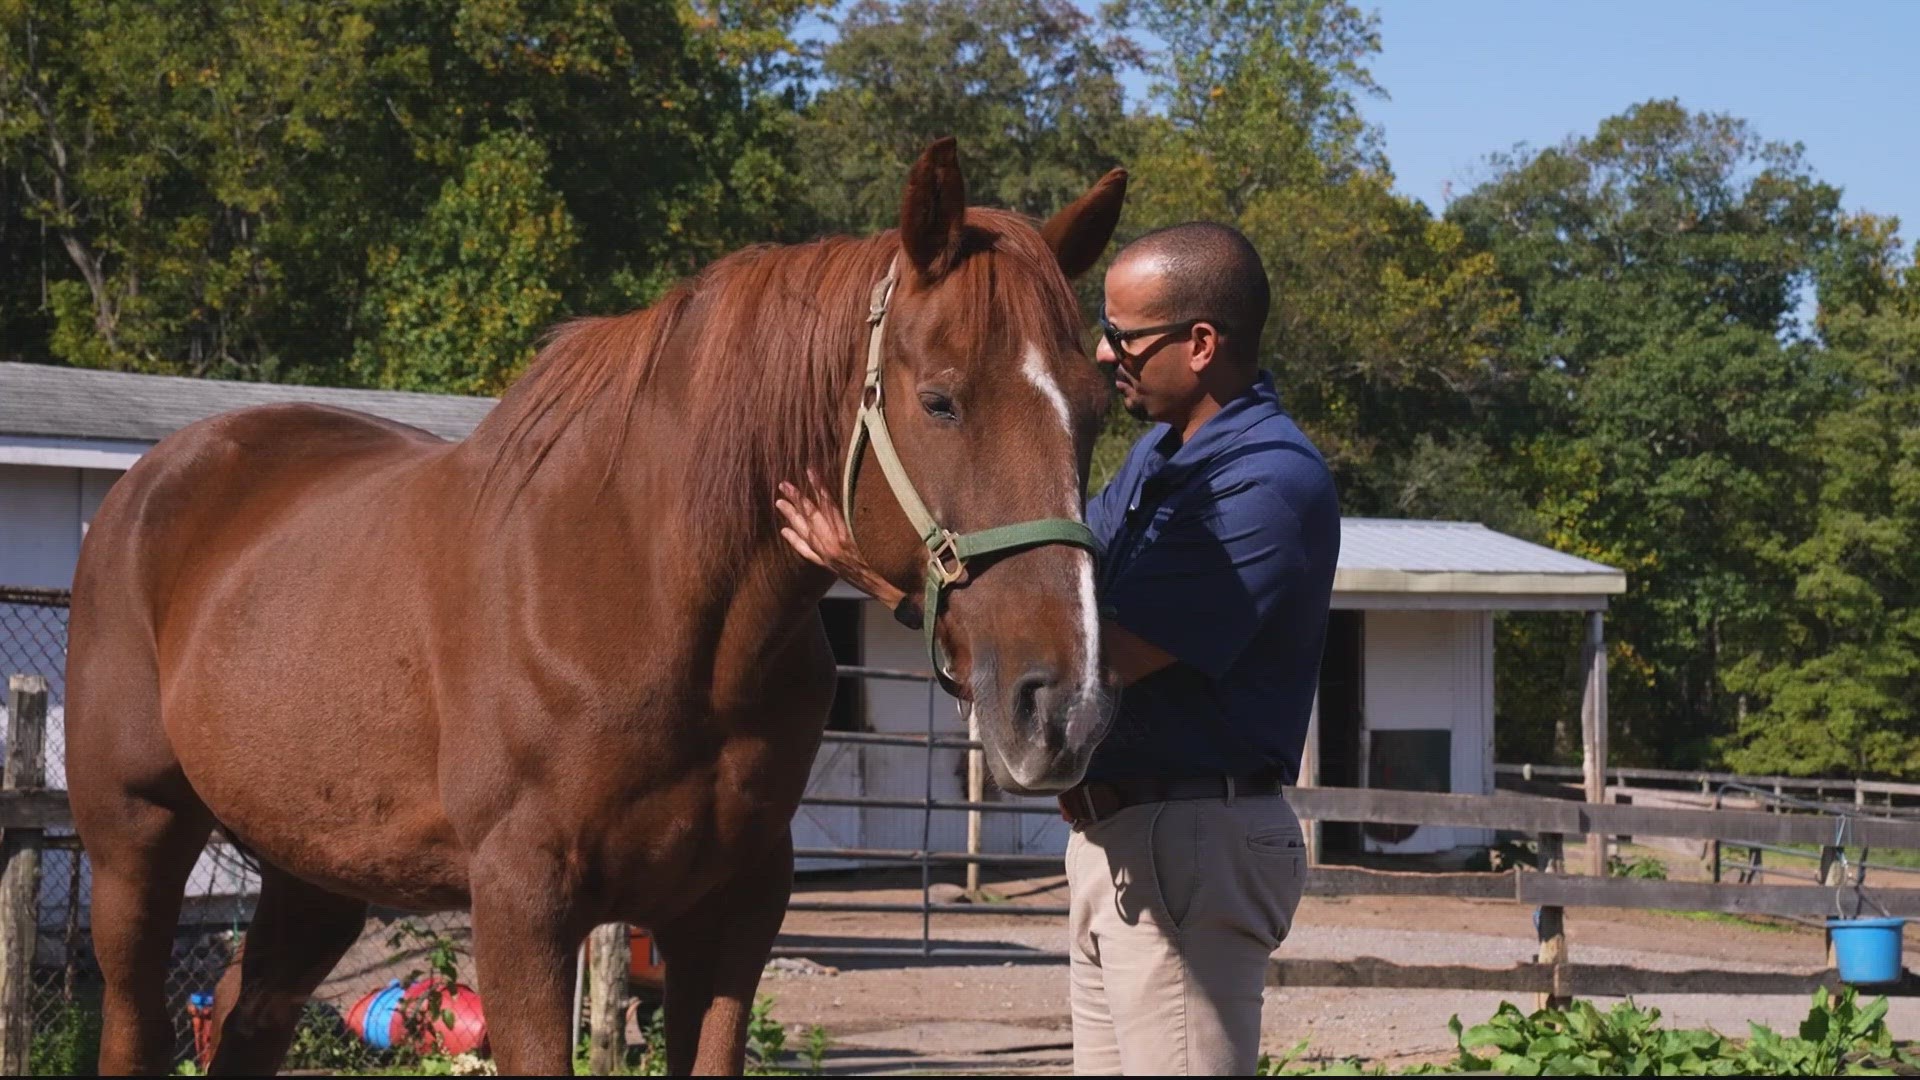 Lifeline Equine Therapy Services isn’t just rescuing horses, but military veterans and service members, too.